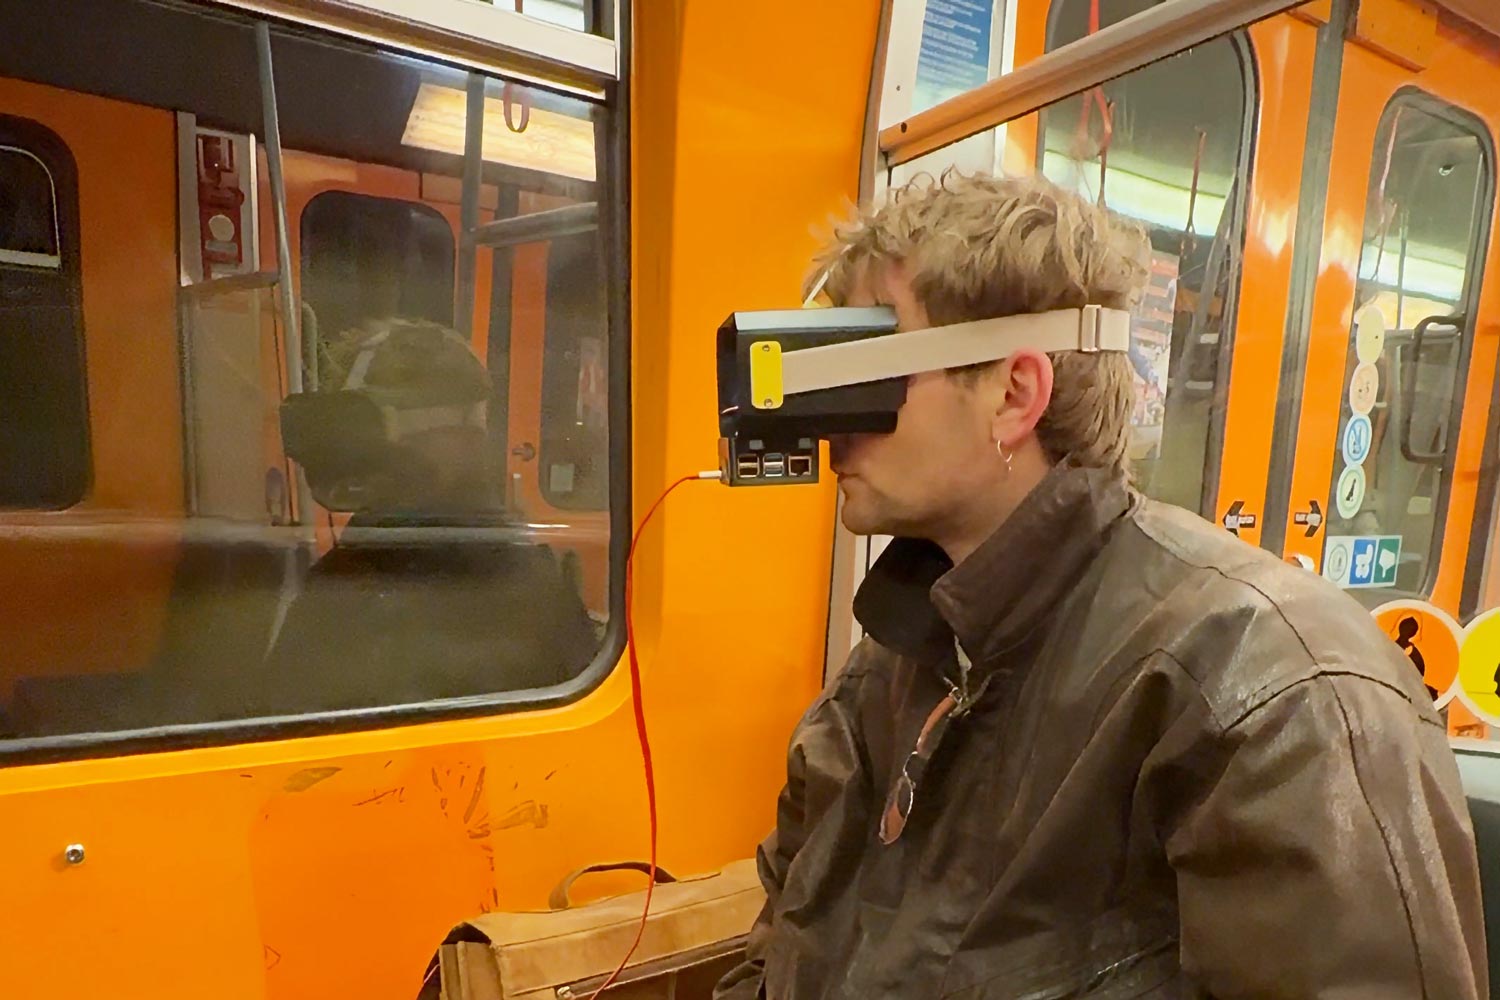 man in a subway wears makeshift x-ray headset